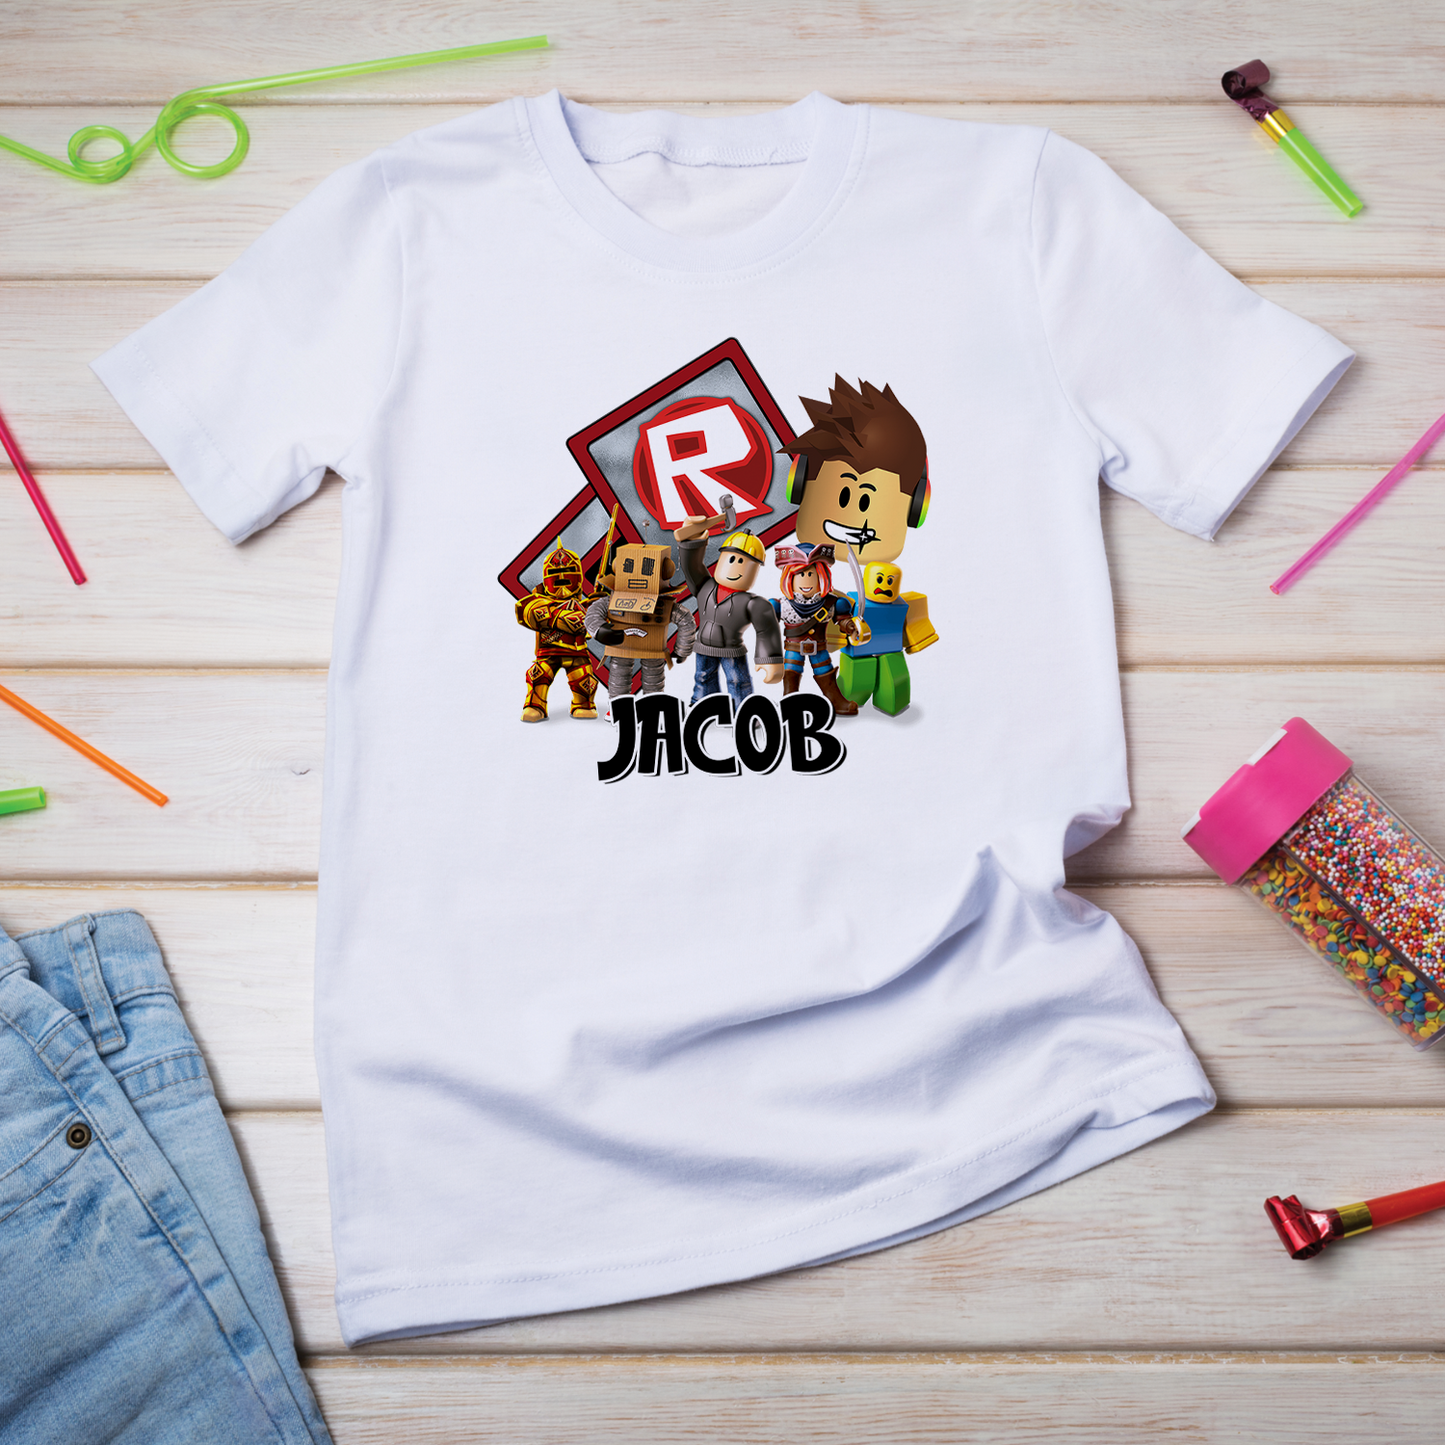 Roblox Birthday Decorations, Roblox for Boys Party Supplies, Roblox Girls, Roblox template, Roblox SVG